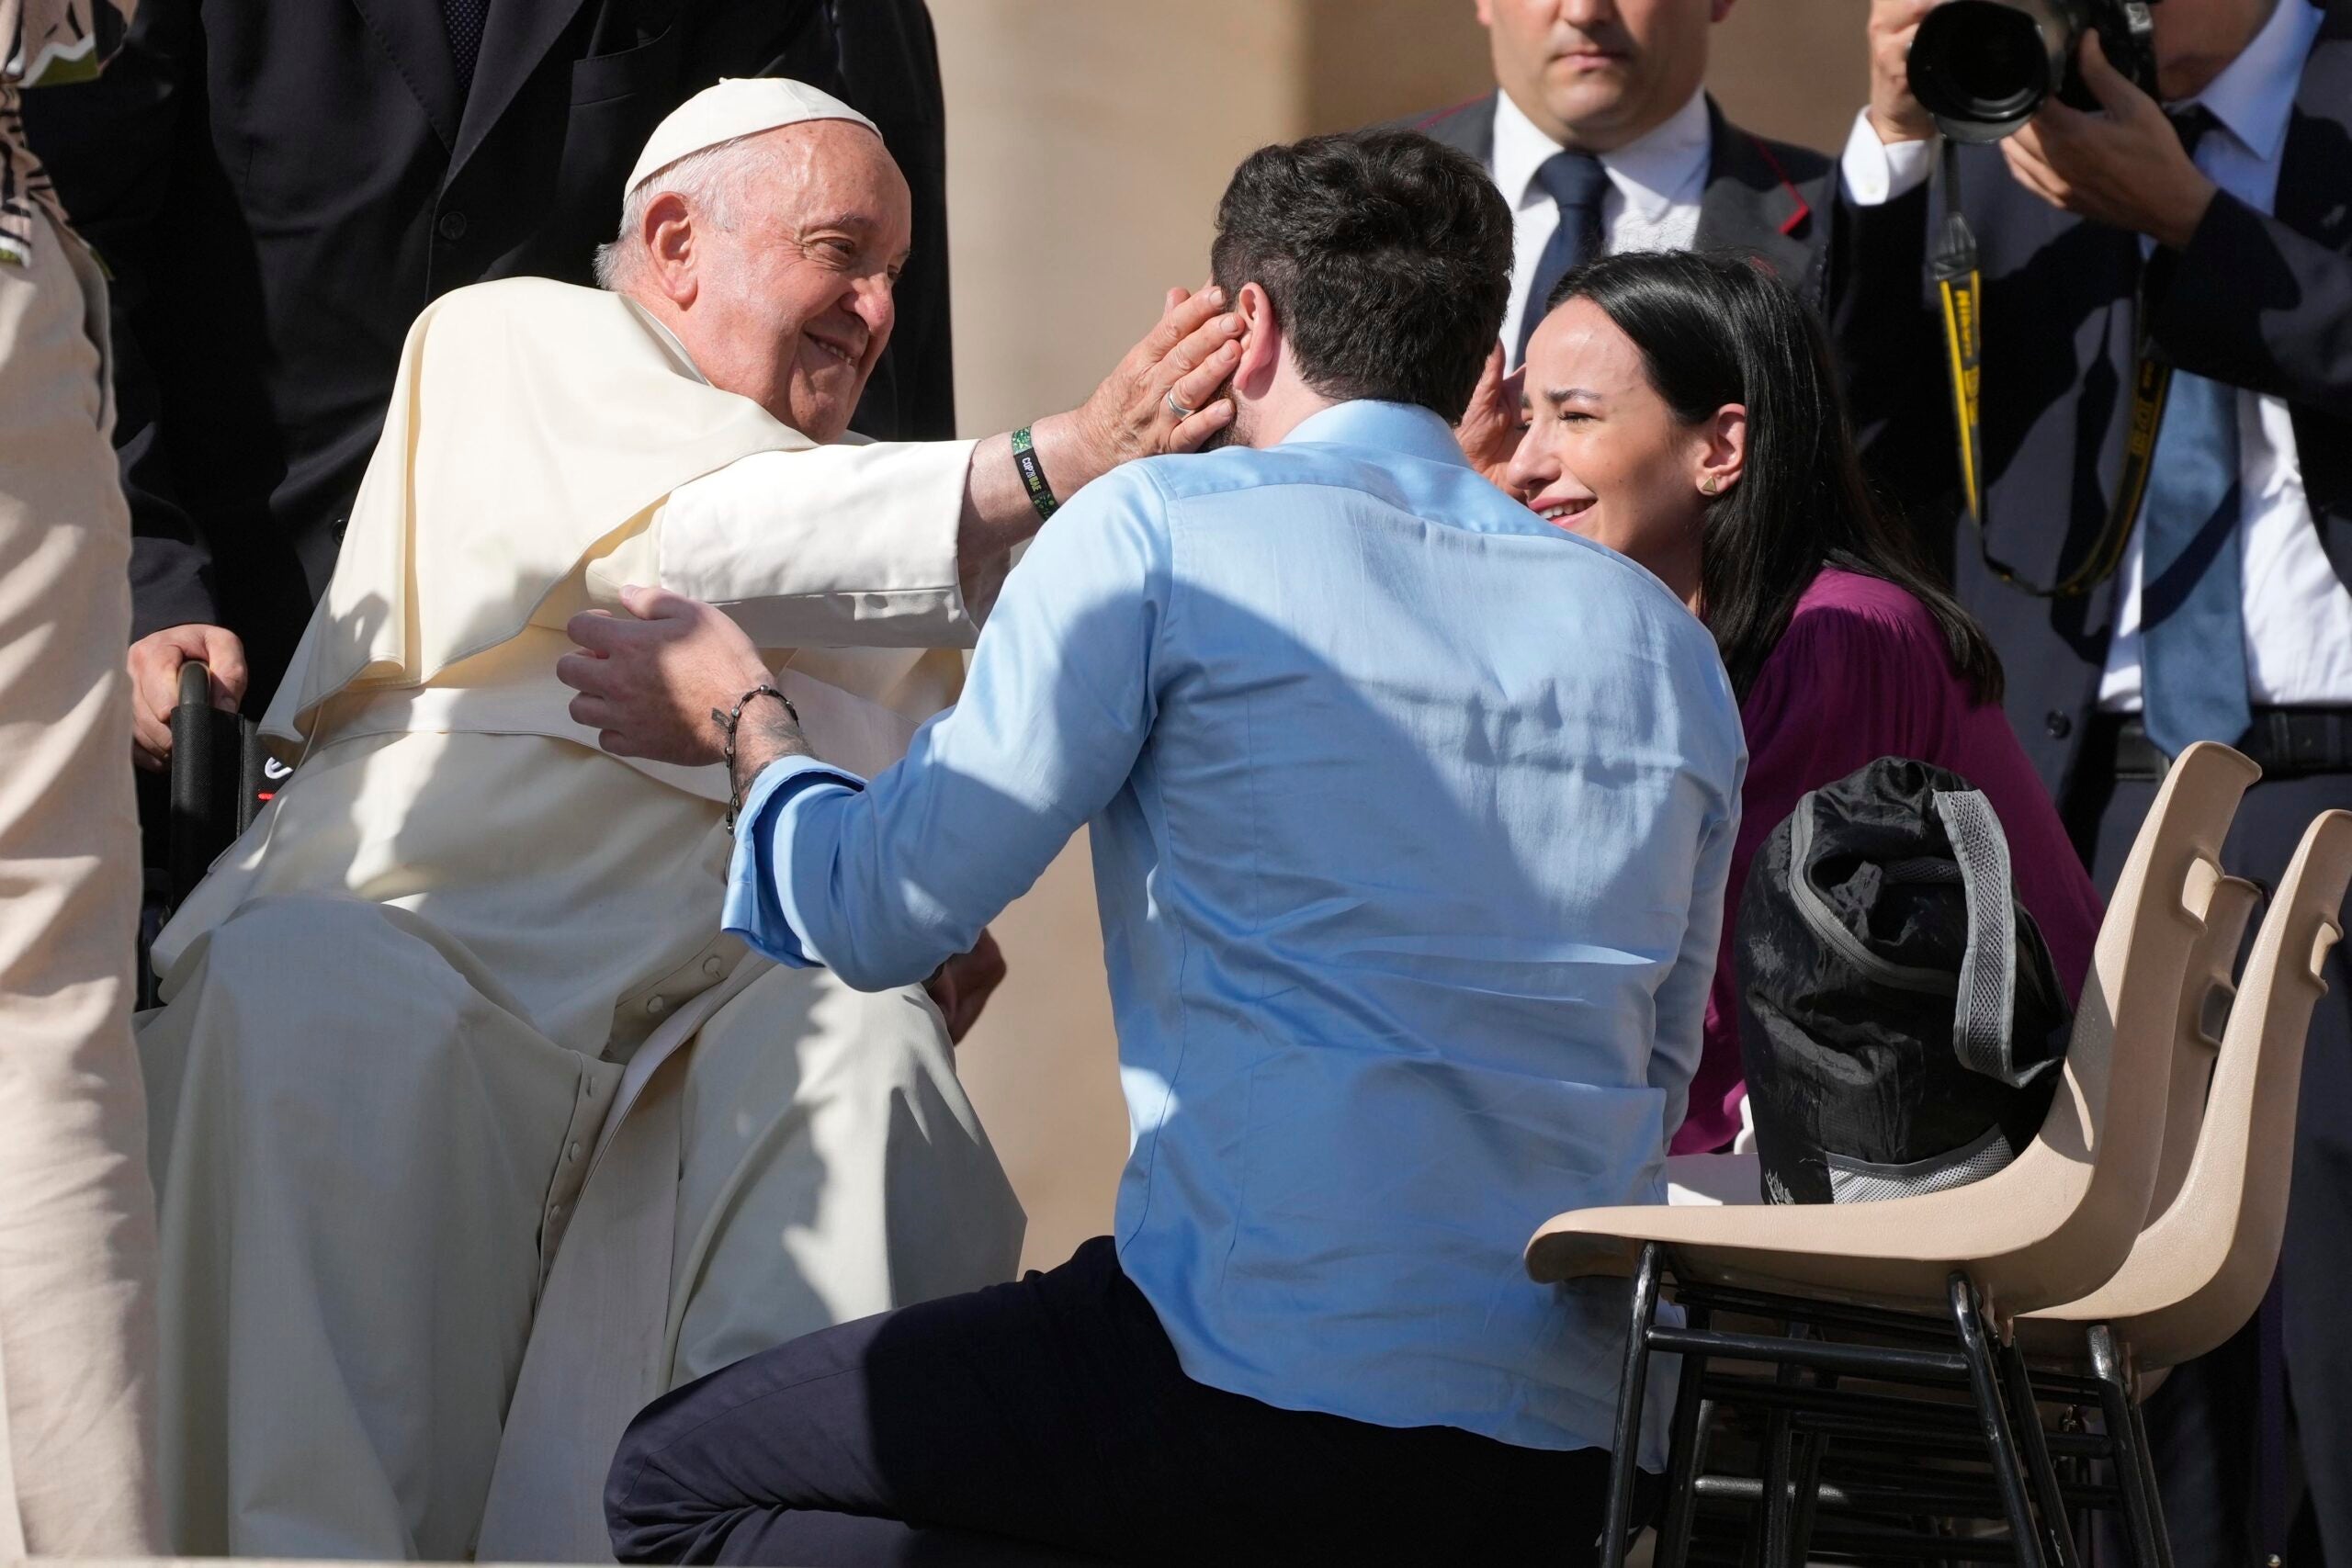 Newlyweds meet with Pope Francis in St. Peter's Square at the Vatican.